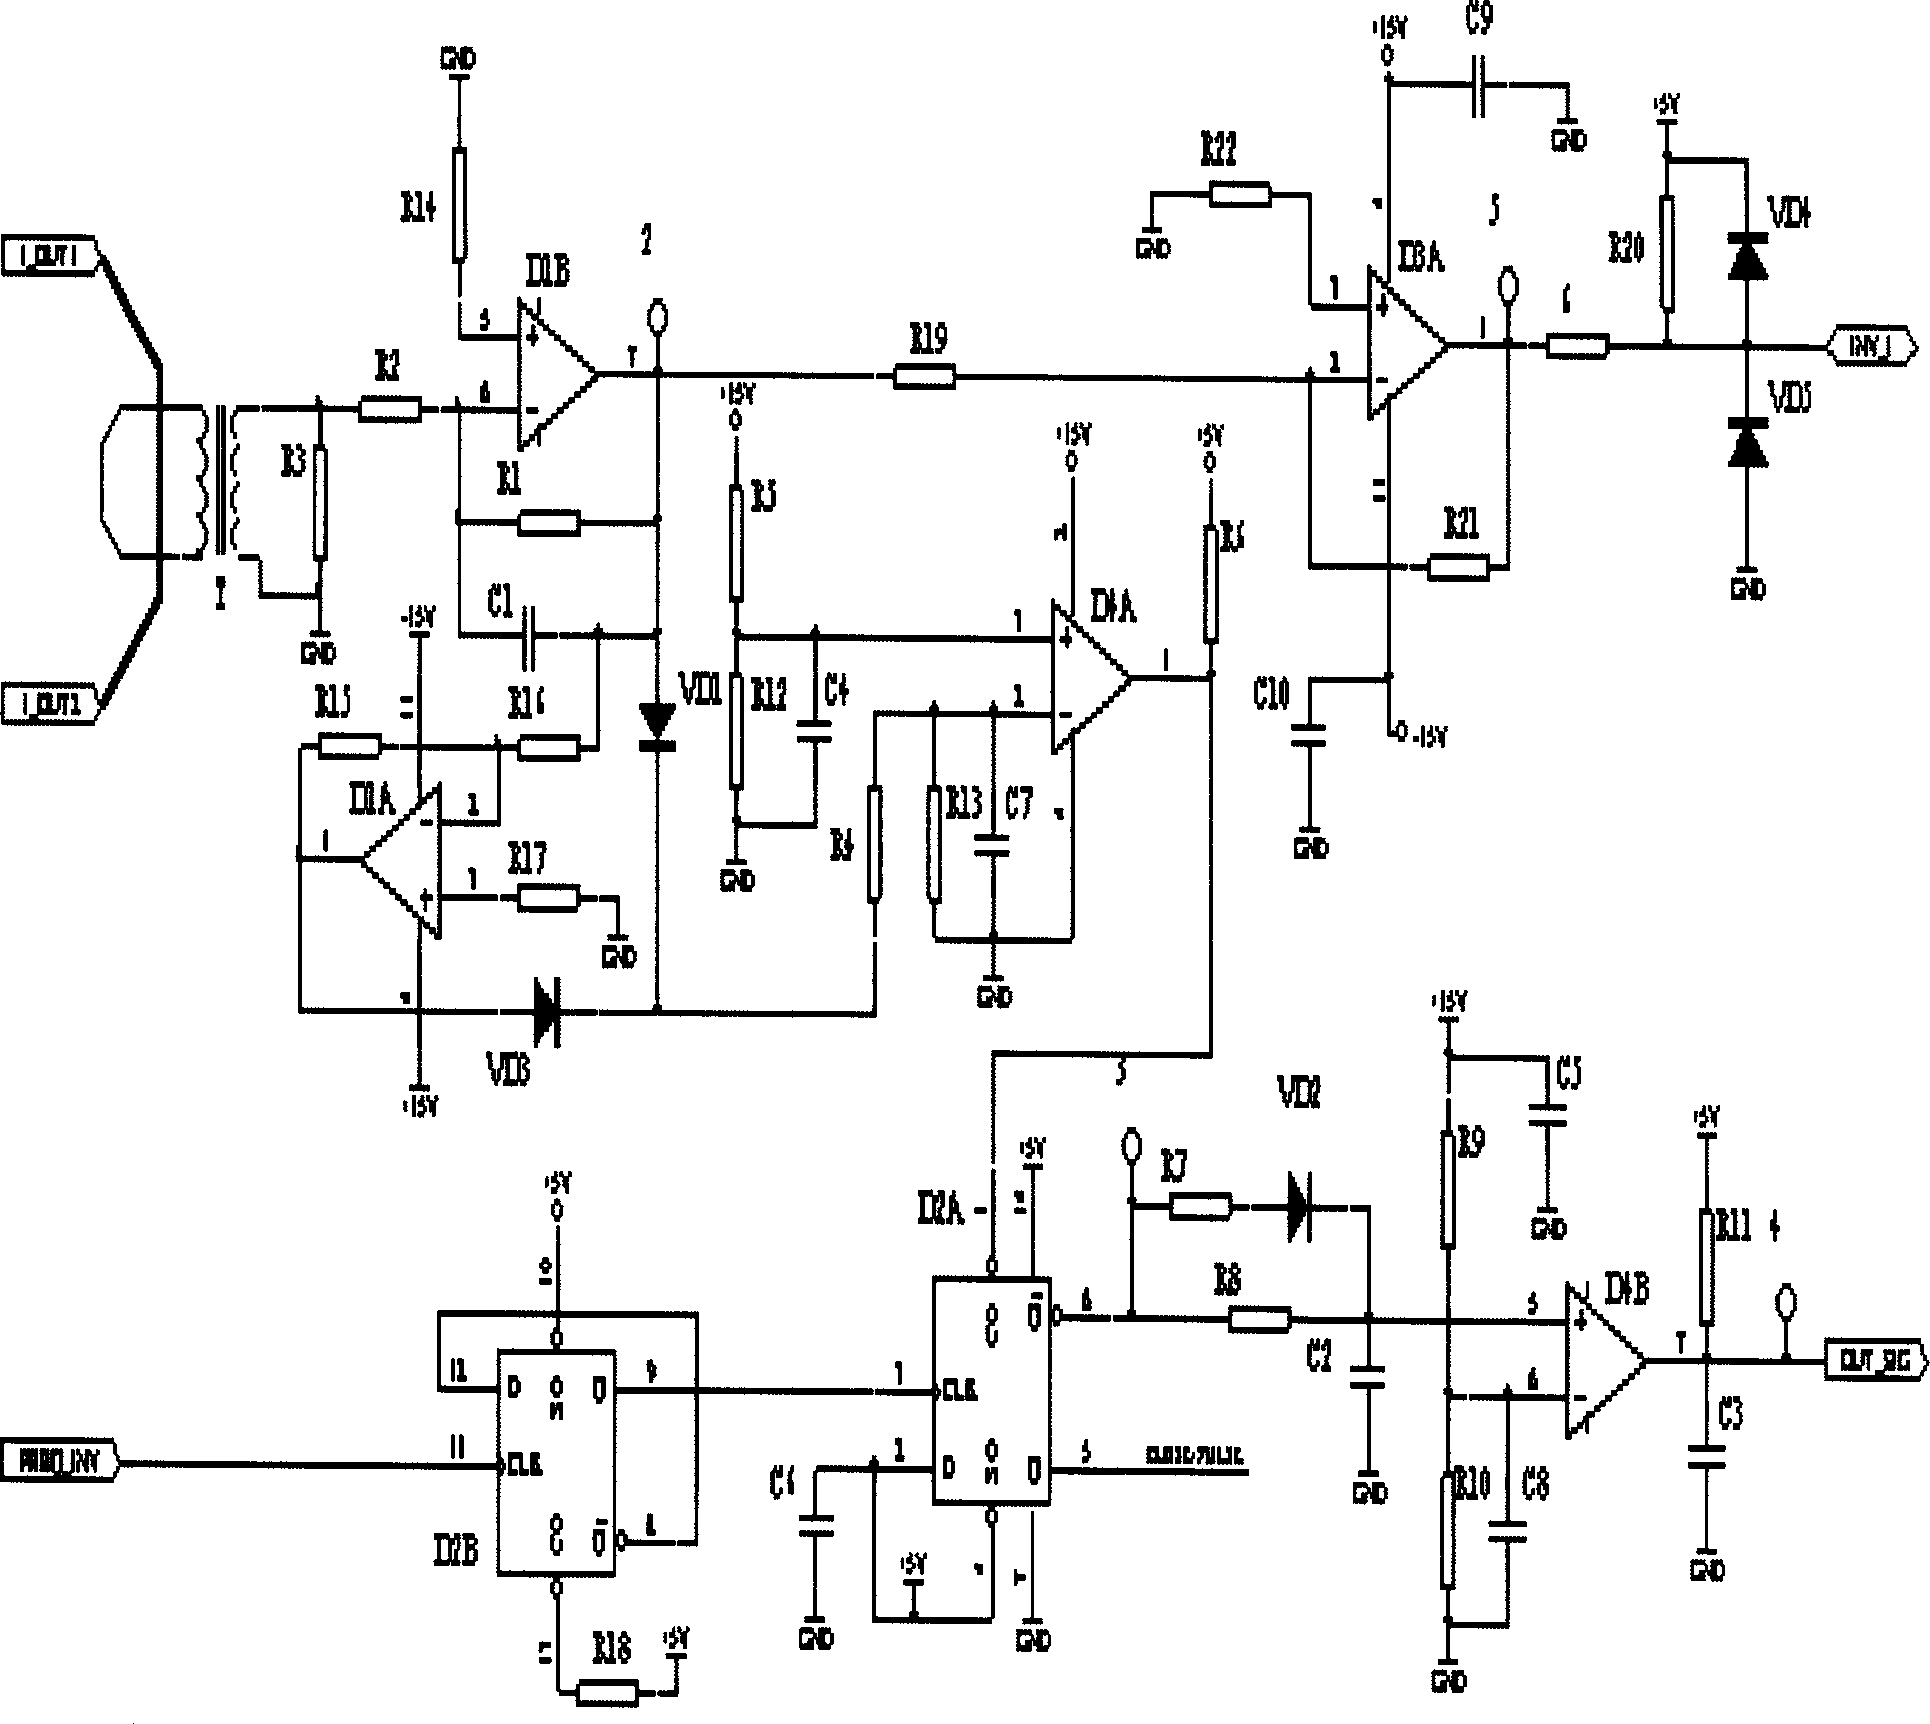 Output overcurrent and short circuit protector for high power contravariant equipment